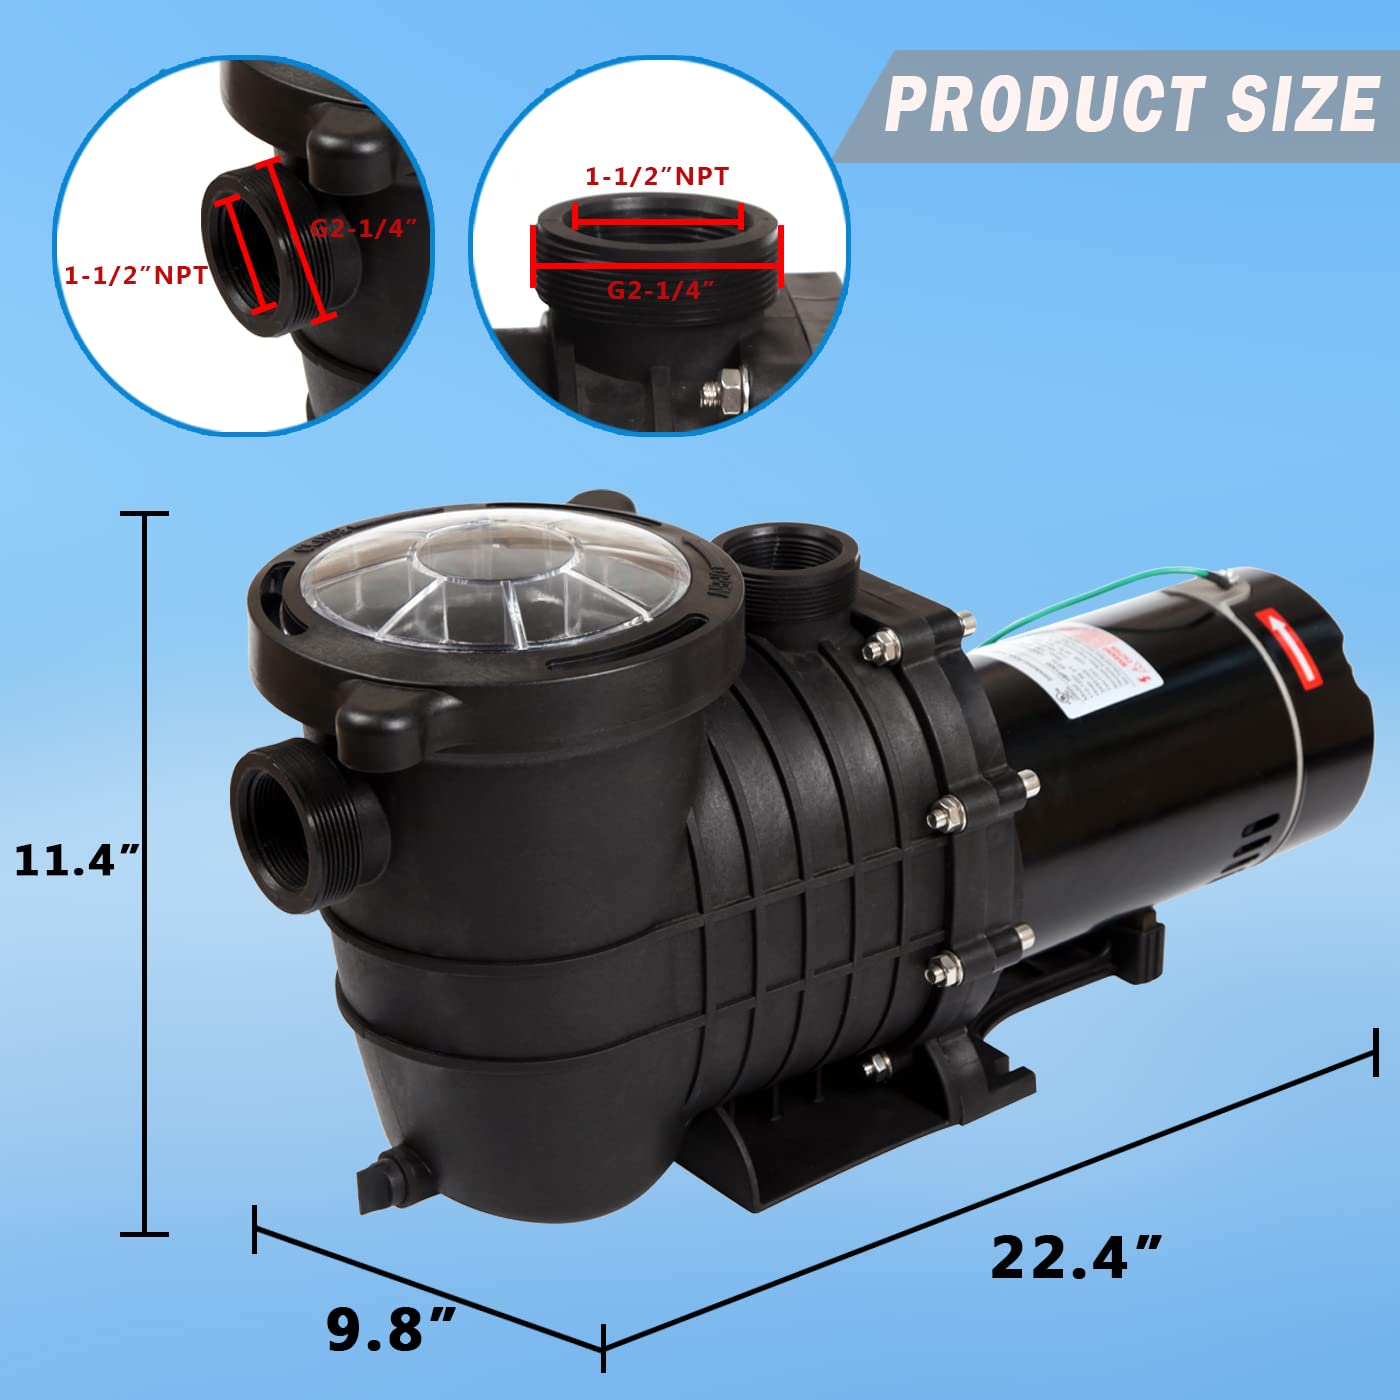 TOPWAY 2HP 110v Swimming Pool Pump 111GPM Filter Garden lnground and Above Ground Pools Water Pump 2.0 HP